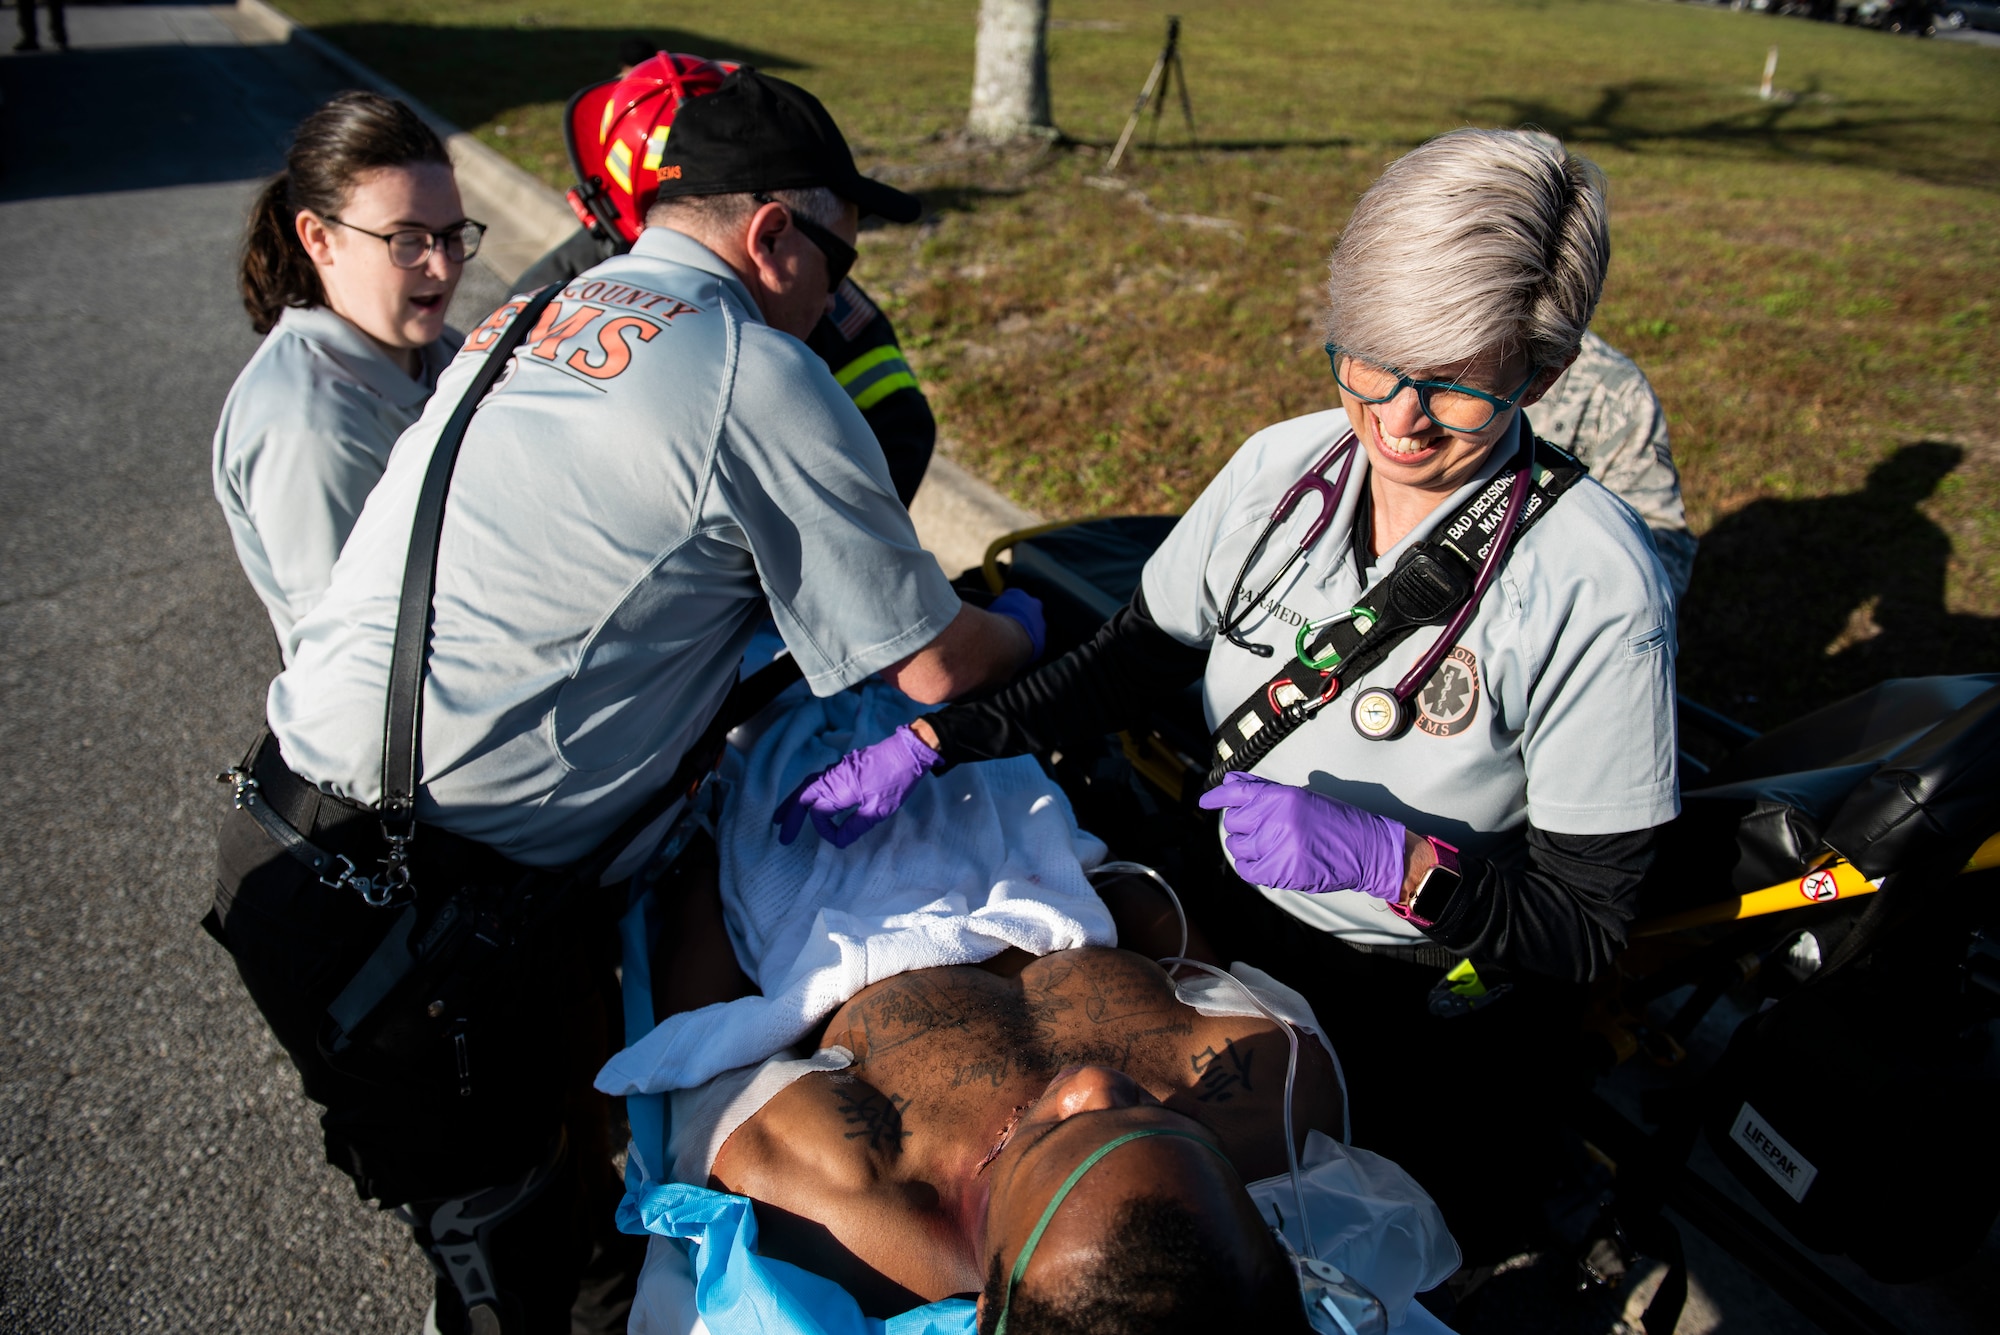 Ashley Thompson, left, Pete Russ, center, and Kelly Guillory, Bay County Emergency Medical Services technicians, load a simulated medical emergency patient during an emergency medical joint exercise at Tyndall Air Force Base, Florida, March 12, 2020. Bay County EMS responded to the scene and facilitated patient transfer to the local hospital. This was a critical point of the exercise training to practice patient hand offs successfully. (U.S. Air Force photo by Staff Sgt. Magen M. Reeves)